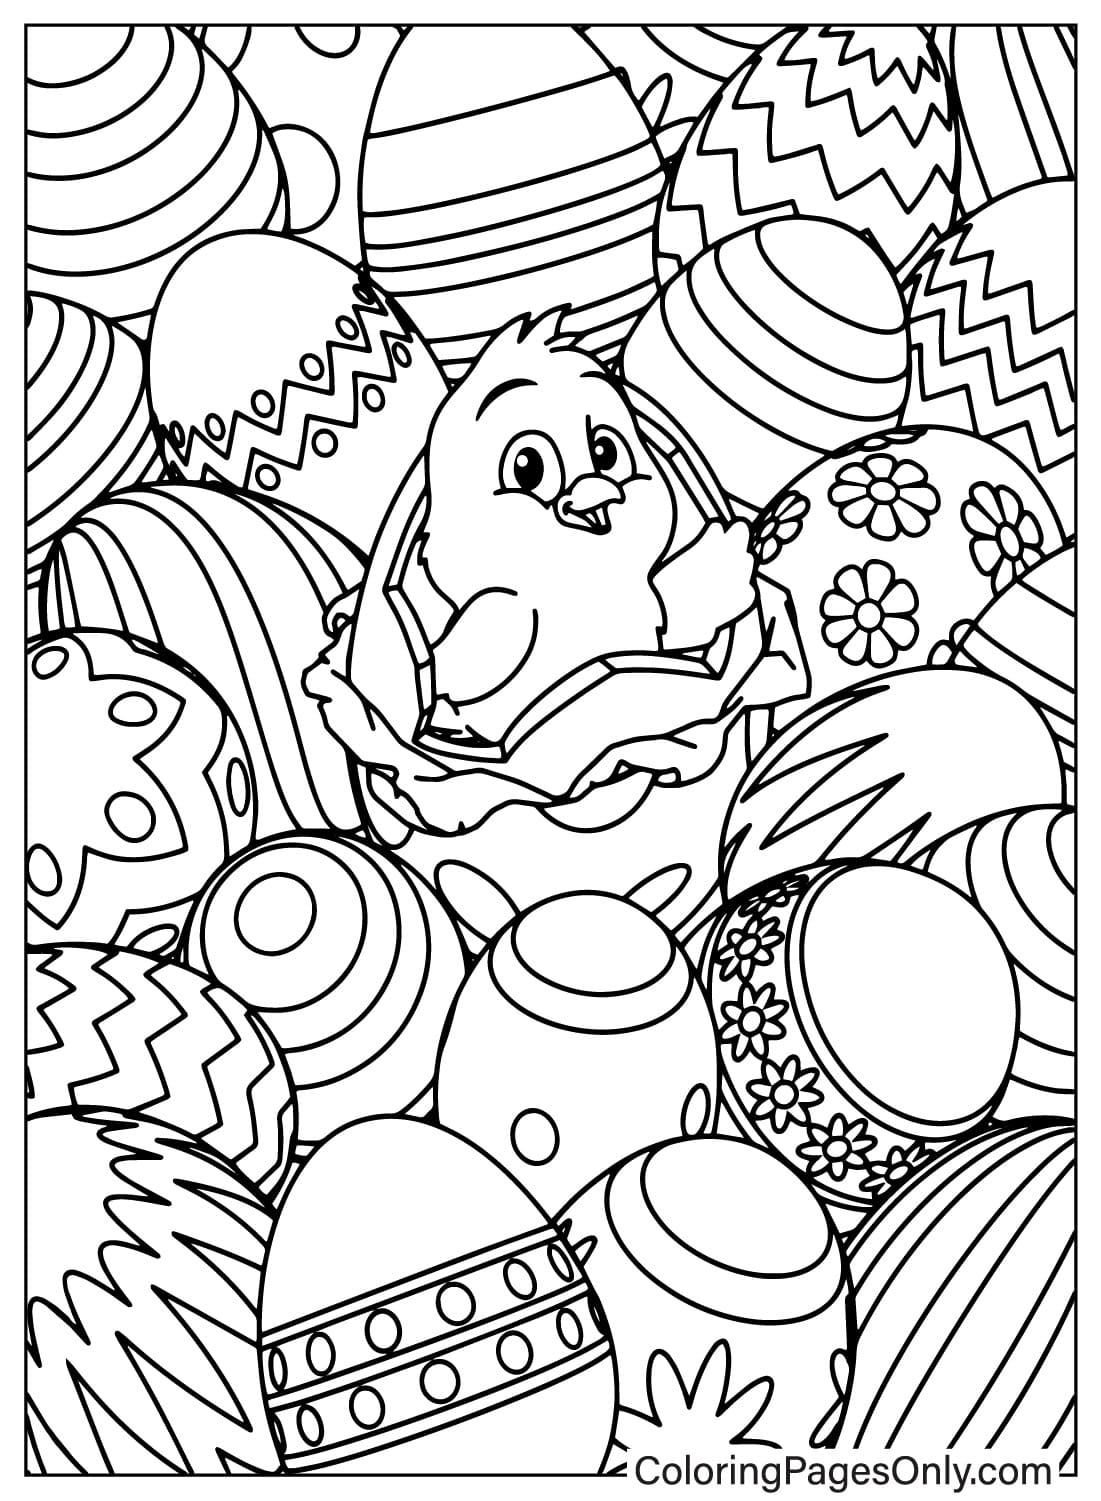 Easter Eggs and Chick Coloring Page